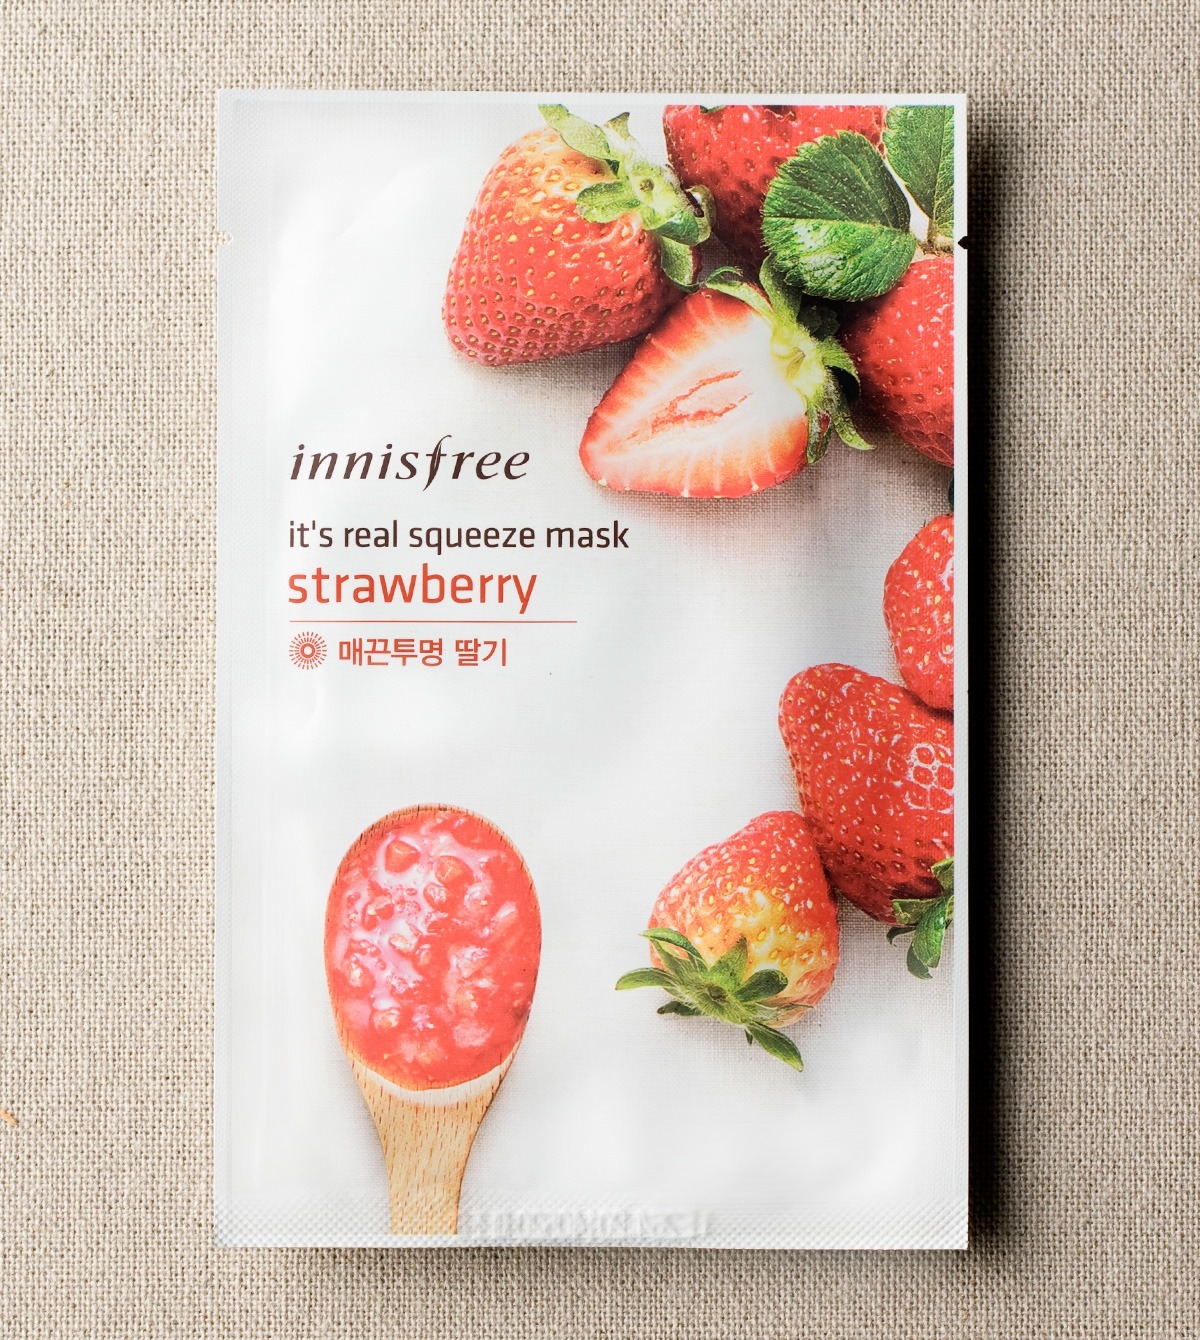 mat-na-mat-na-dau-tay-innisfree-its-real-squeeze-mask-strawberry-han-quoc-1027